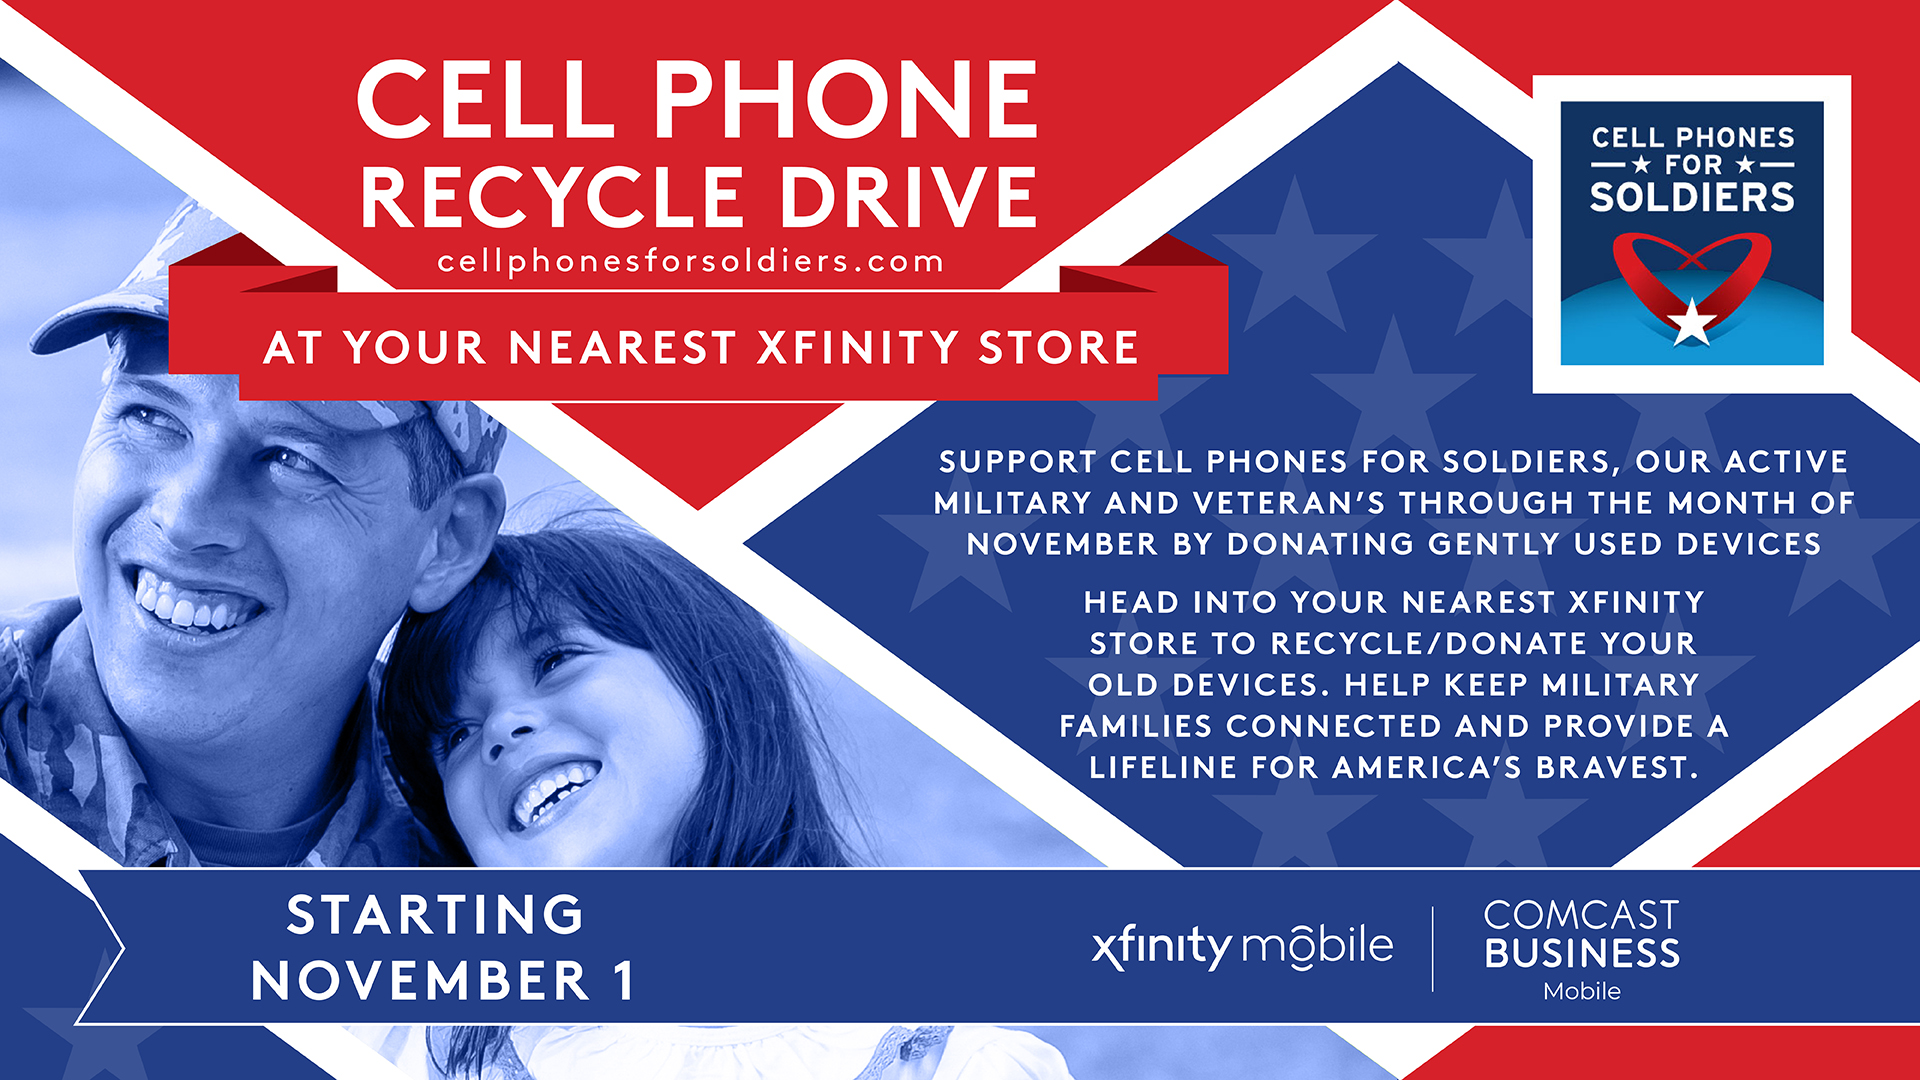 Cell Phone Recycling Drive flyer